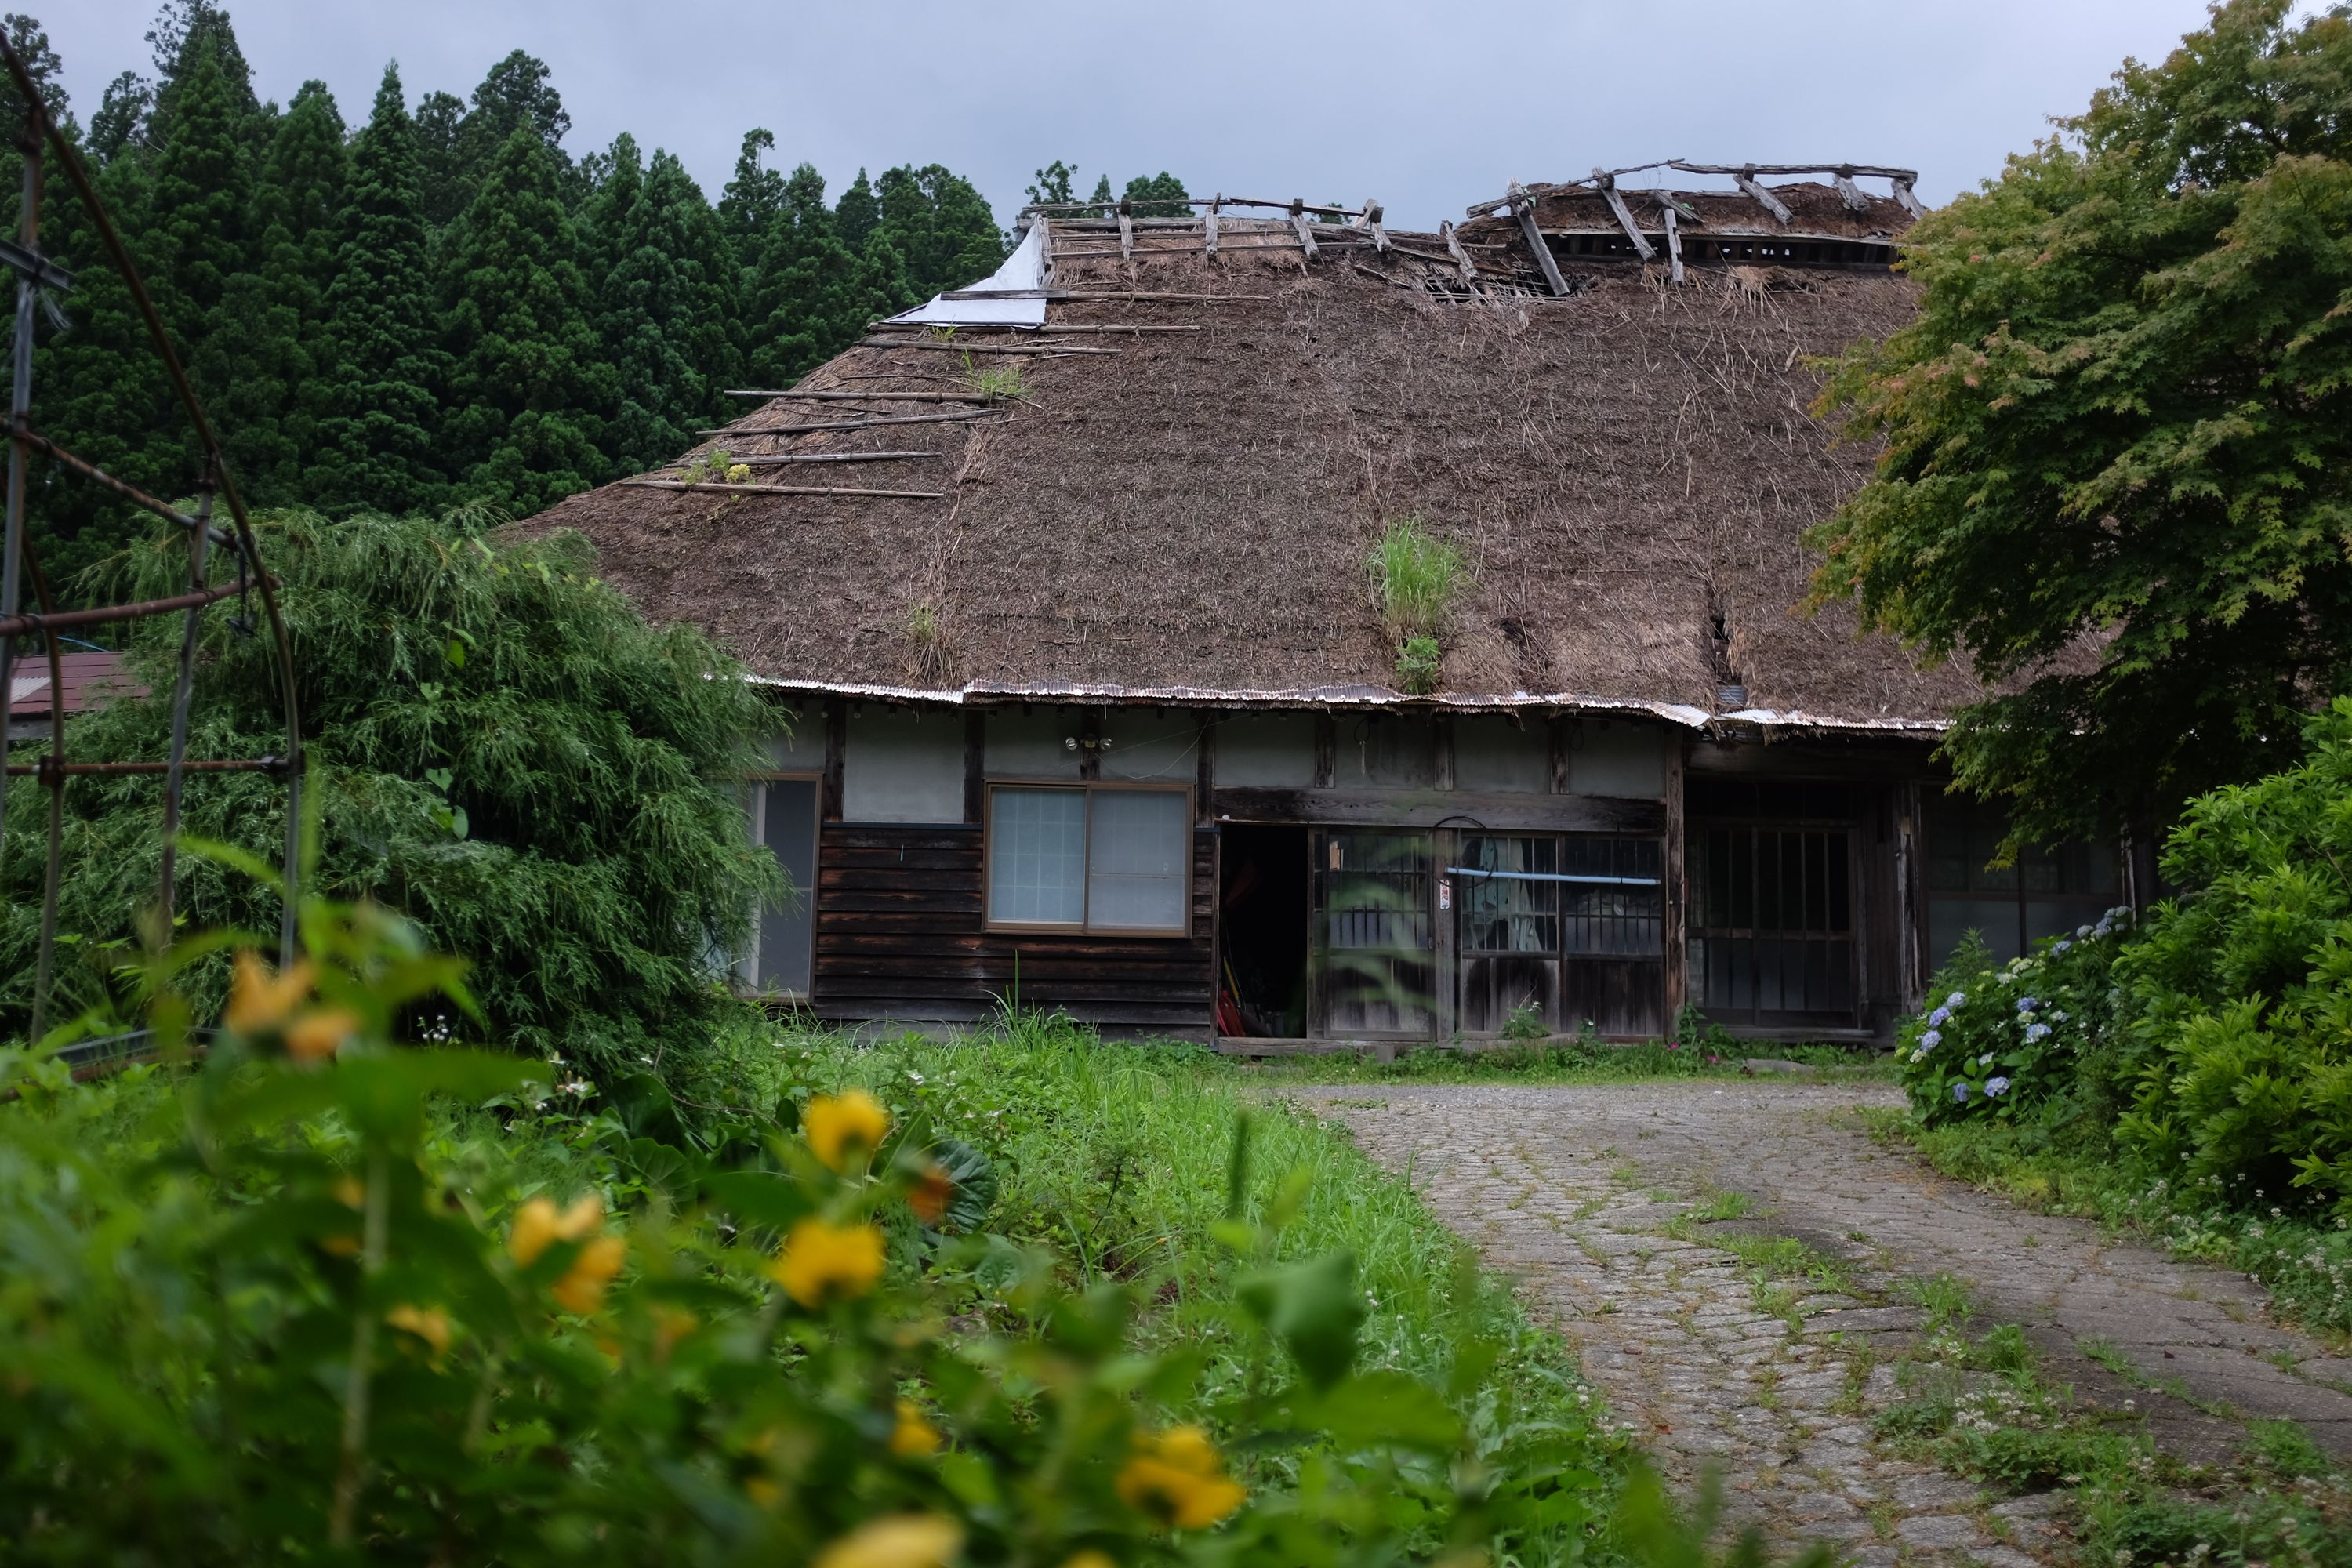 A thatch-roofed farmhouse in a state of disrepair.